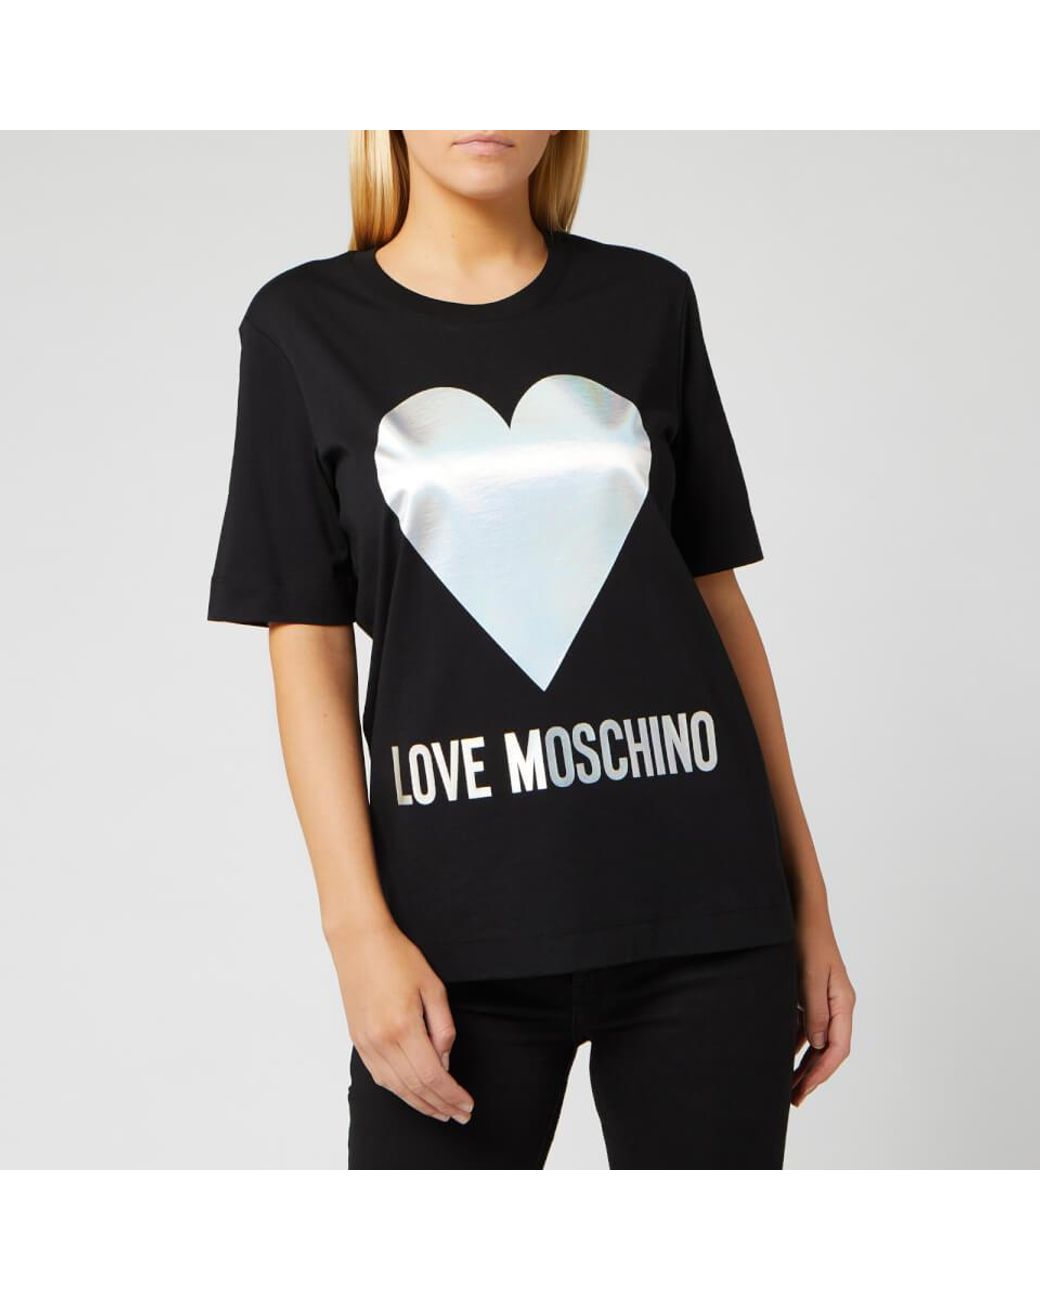 Love Moschino Silver Heart T-shirt in Black | Lyst